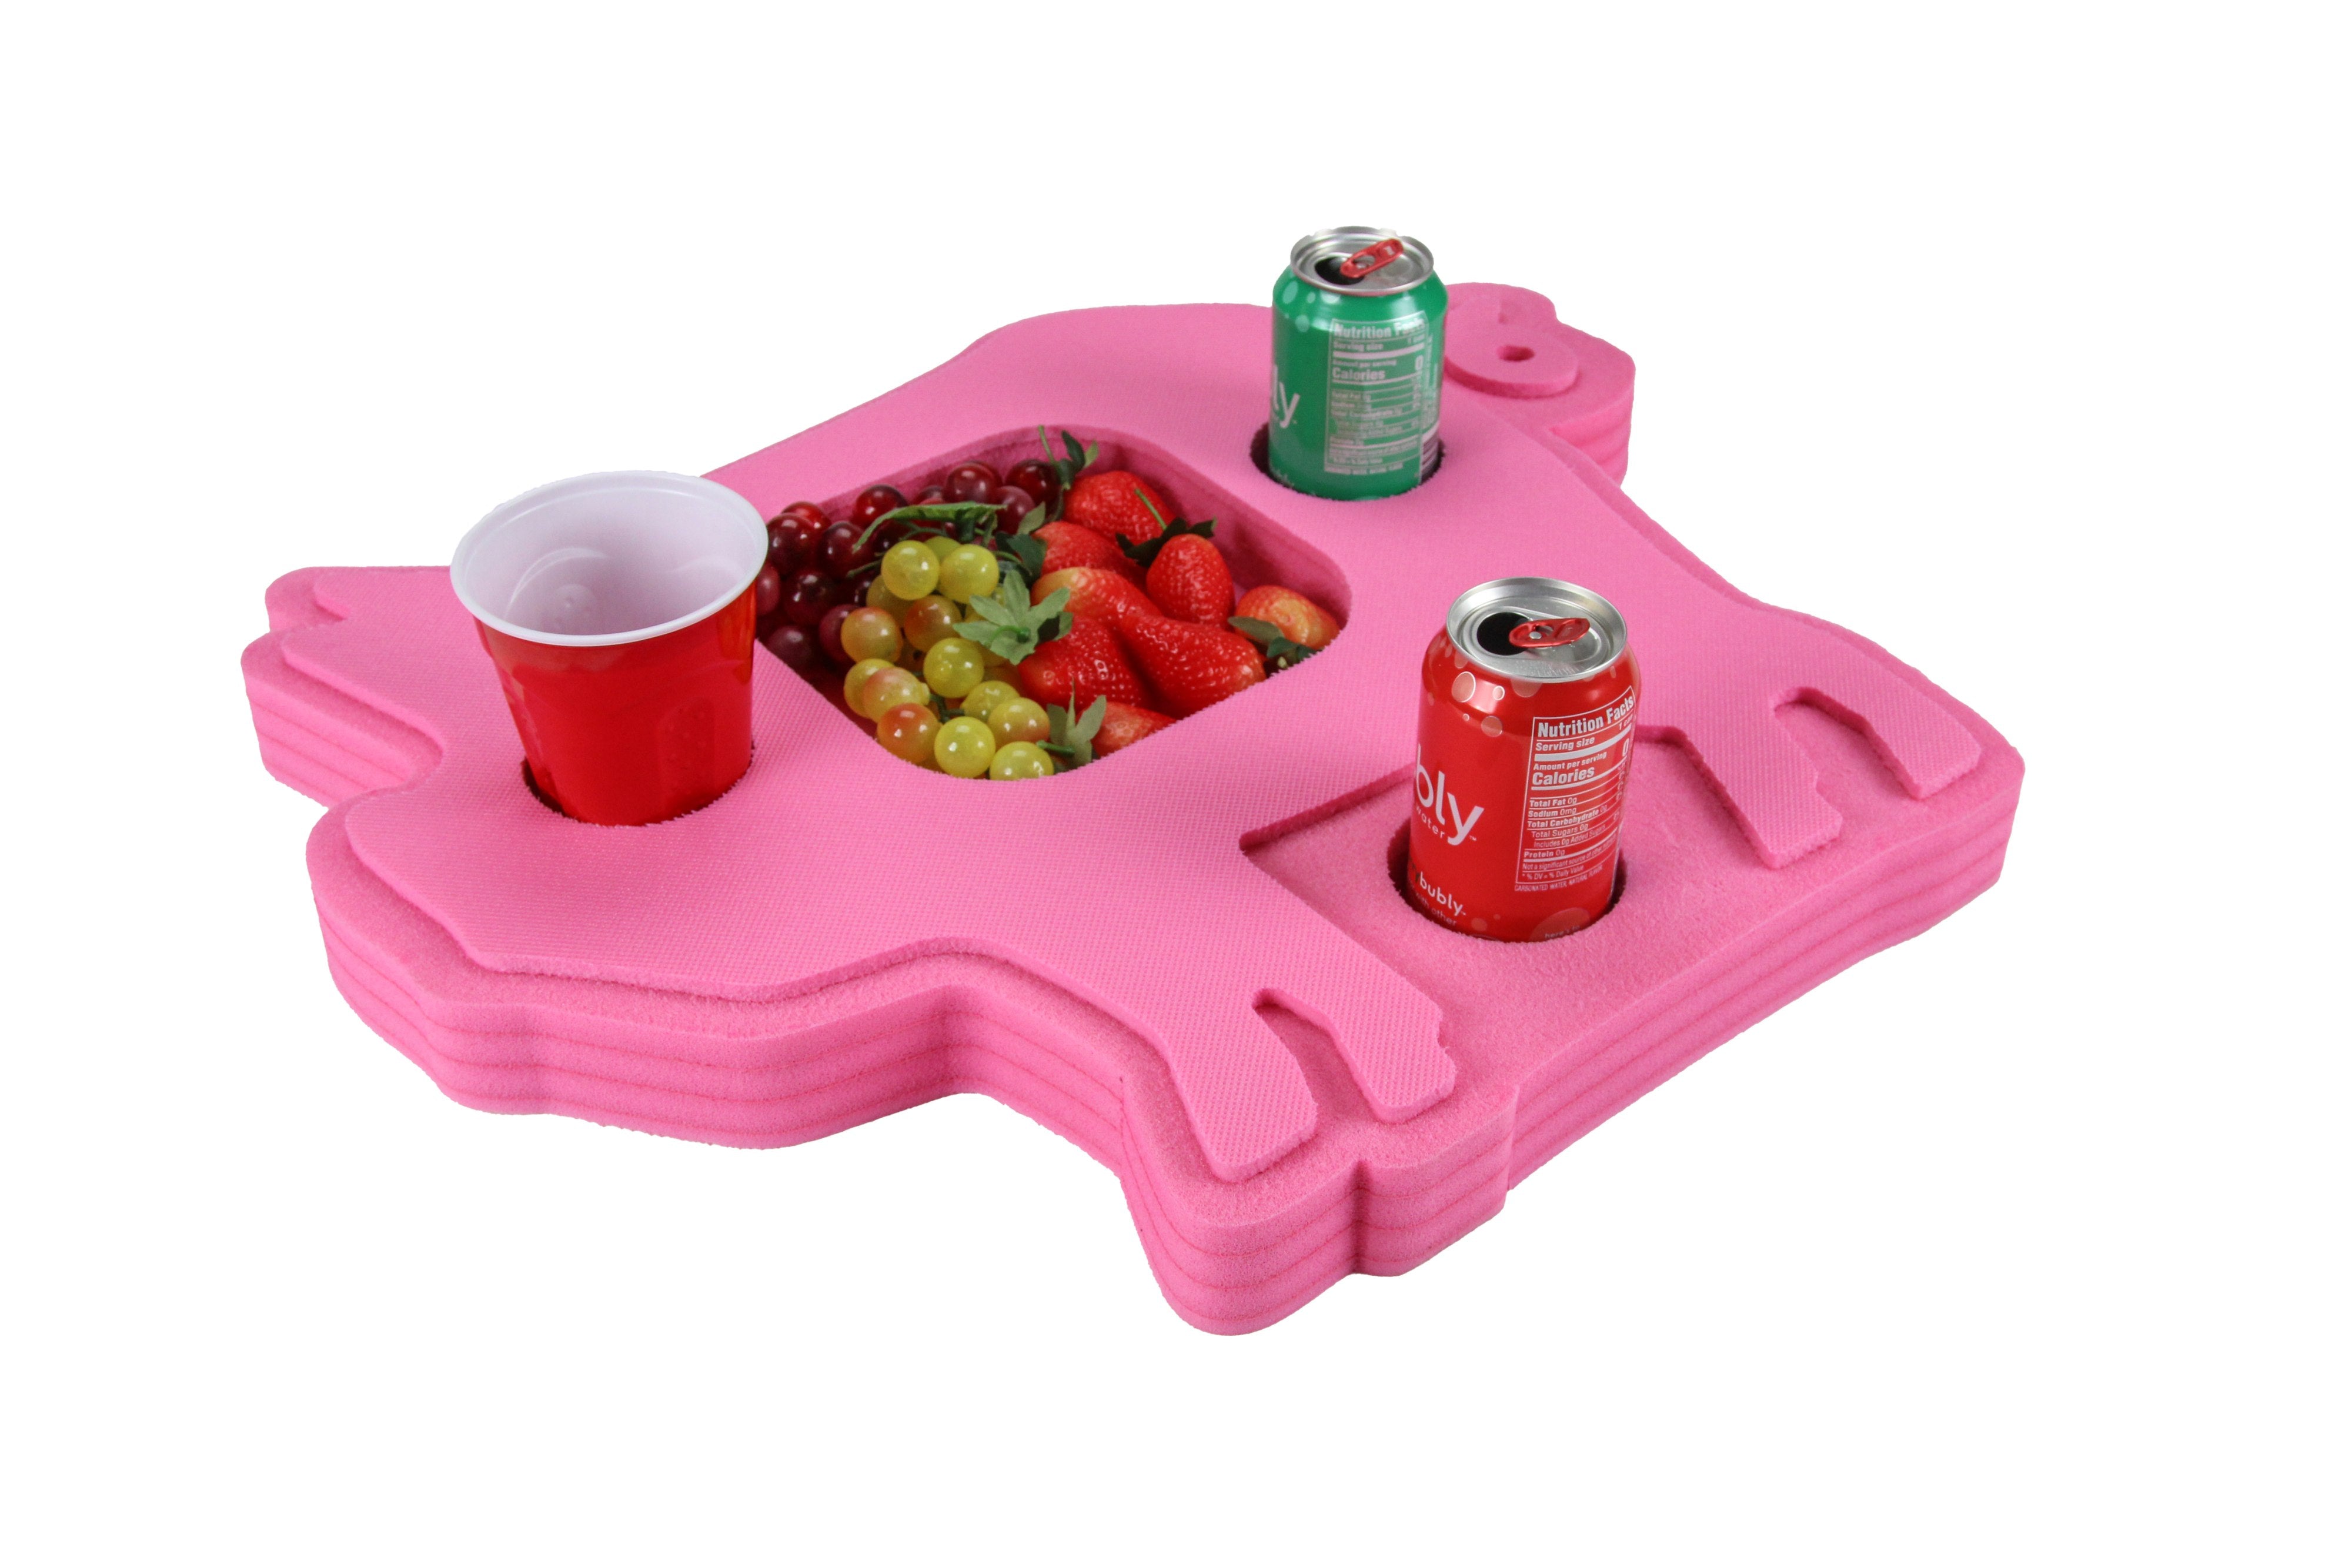 Floating Pig Shape Drink Holder Refreshment Table Tray PoolBeach Party Float Lounge Durable Foam 4 Compartment UV Resistant Cup Holders 22.9 Inches